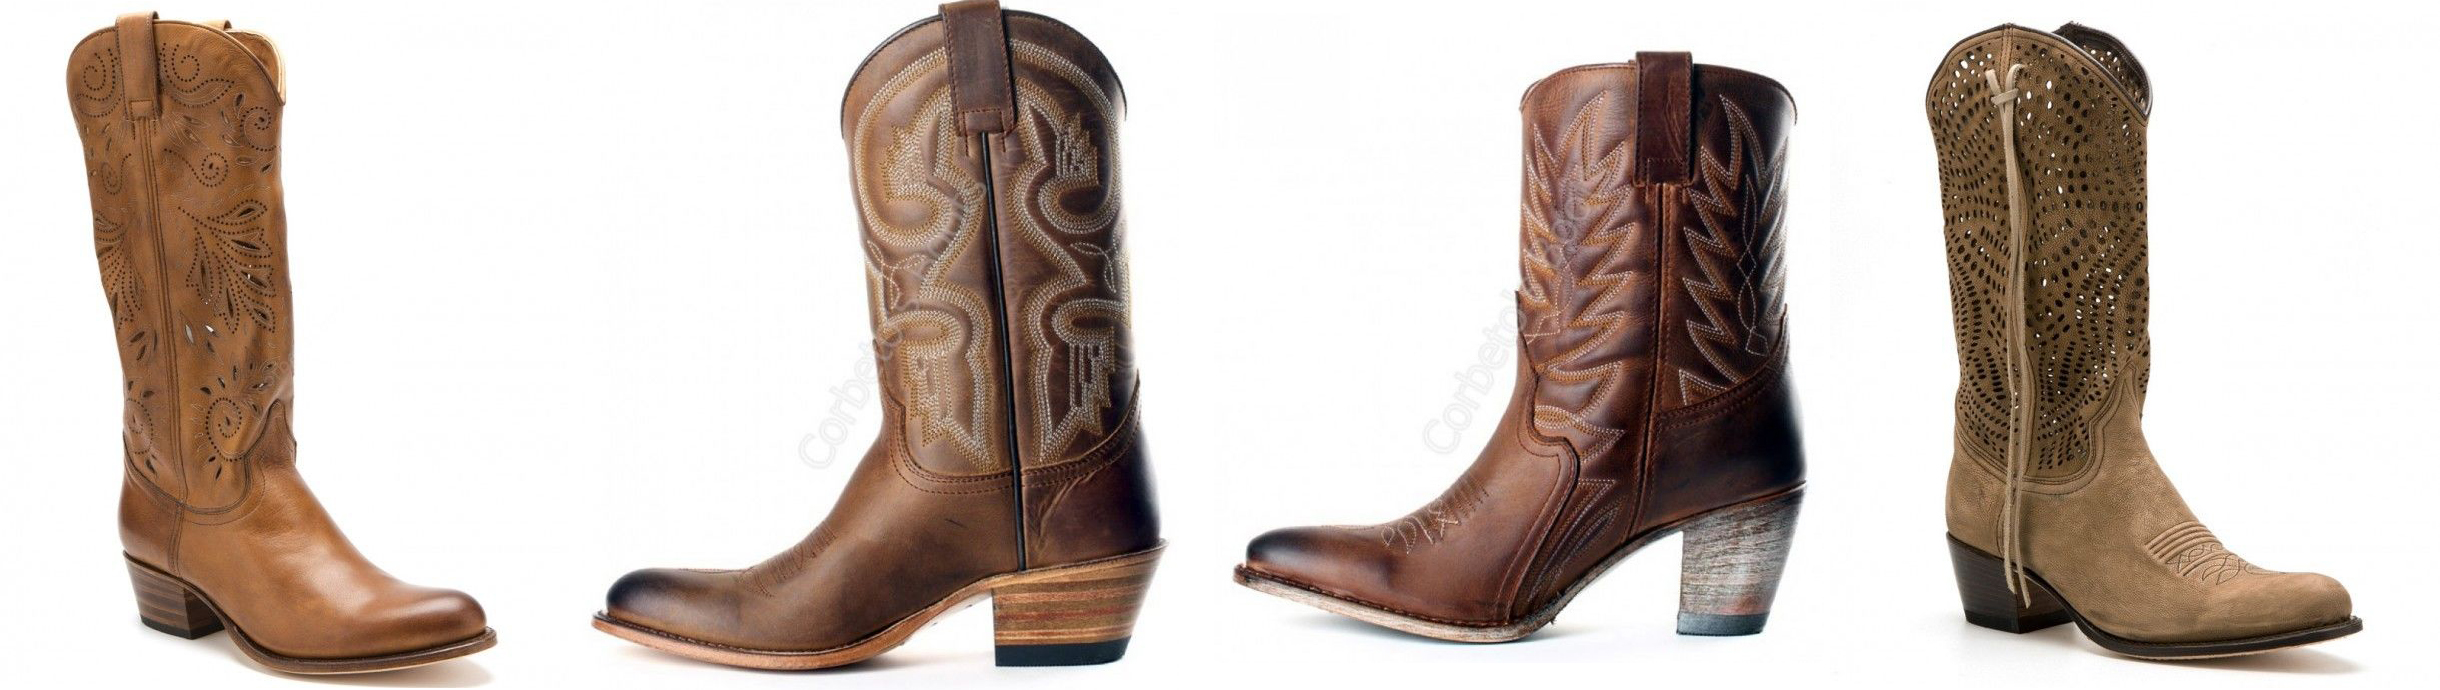 mexican boots womens